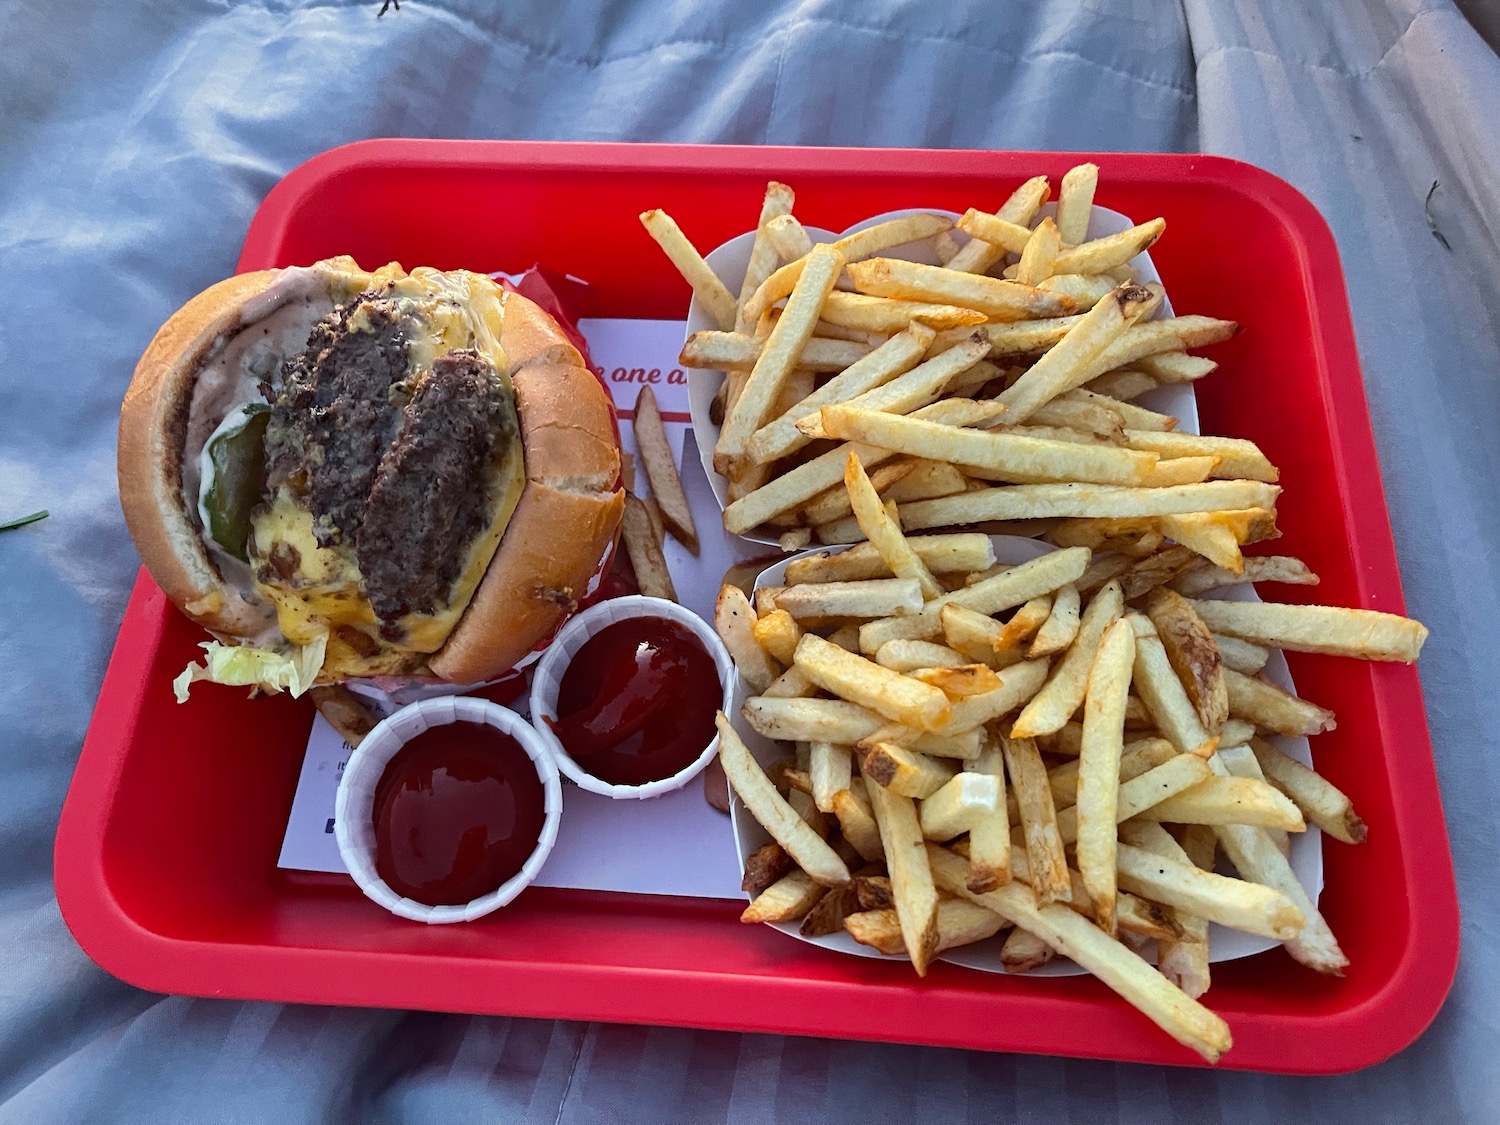 a tray of french fries and burger